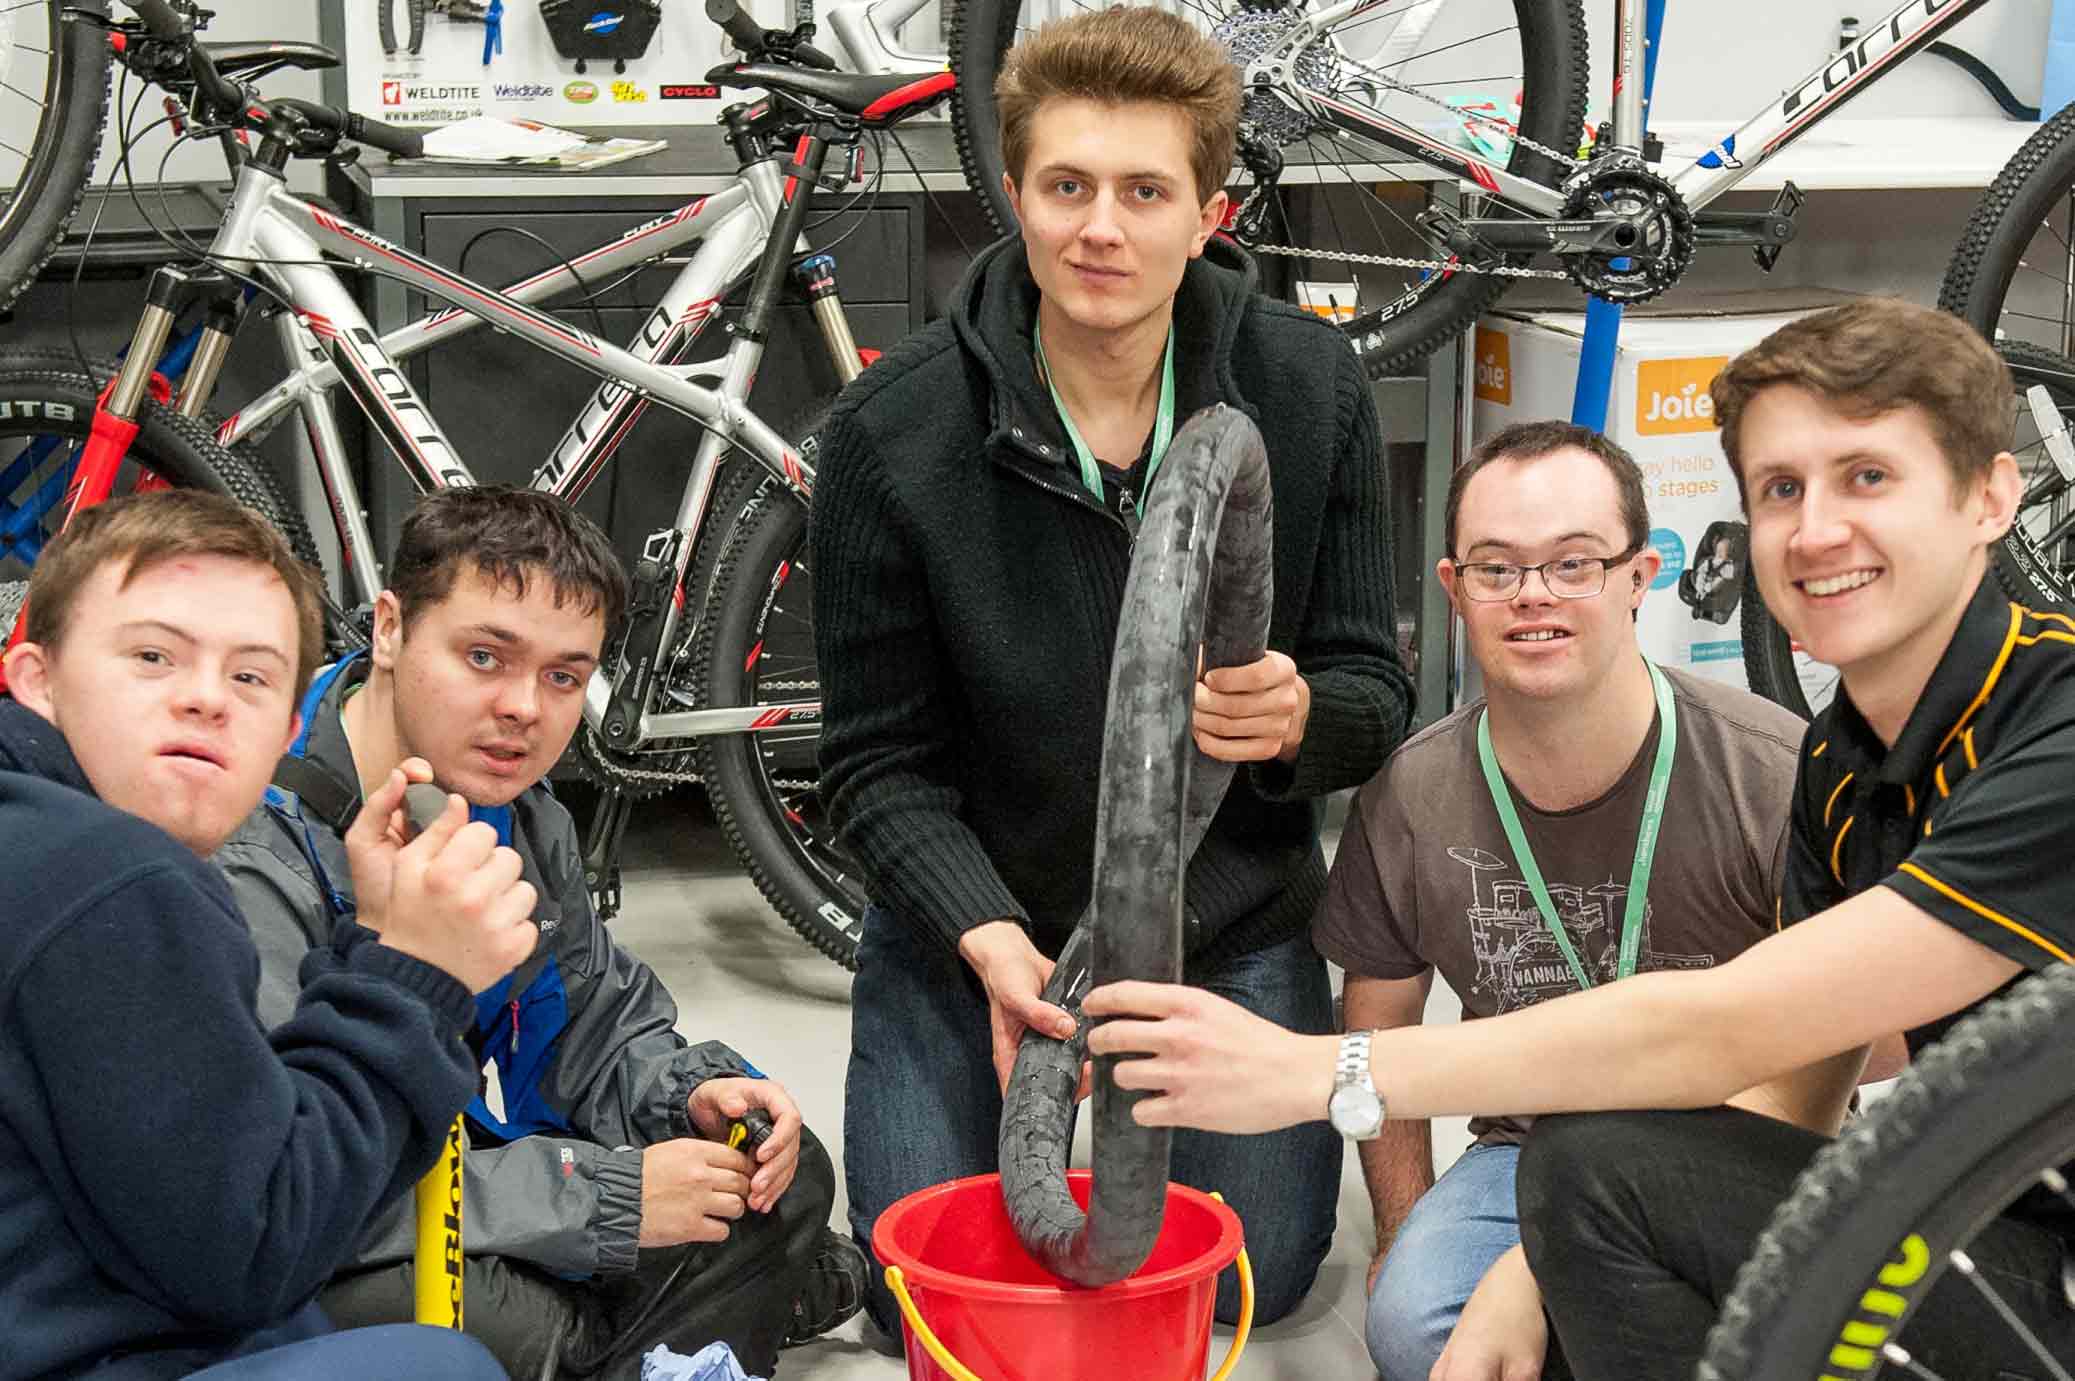 From left to right – Students Jake Vicars, Alex Lofthouse, Alex Guadagnino and Jacob Brown from Henshaws learn how to fix a puncture during a bike workshop with Adam Jones, Assistant Manager at Halfords on Knaresborough Road